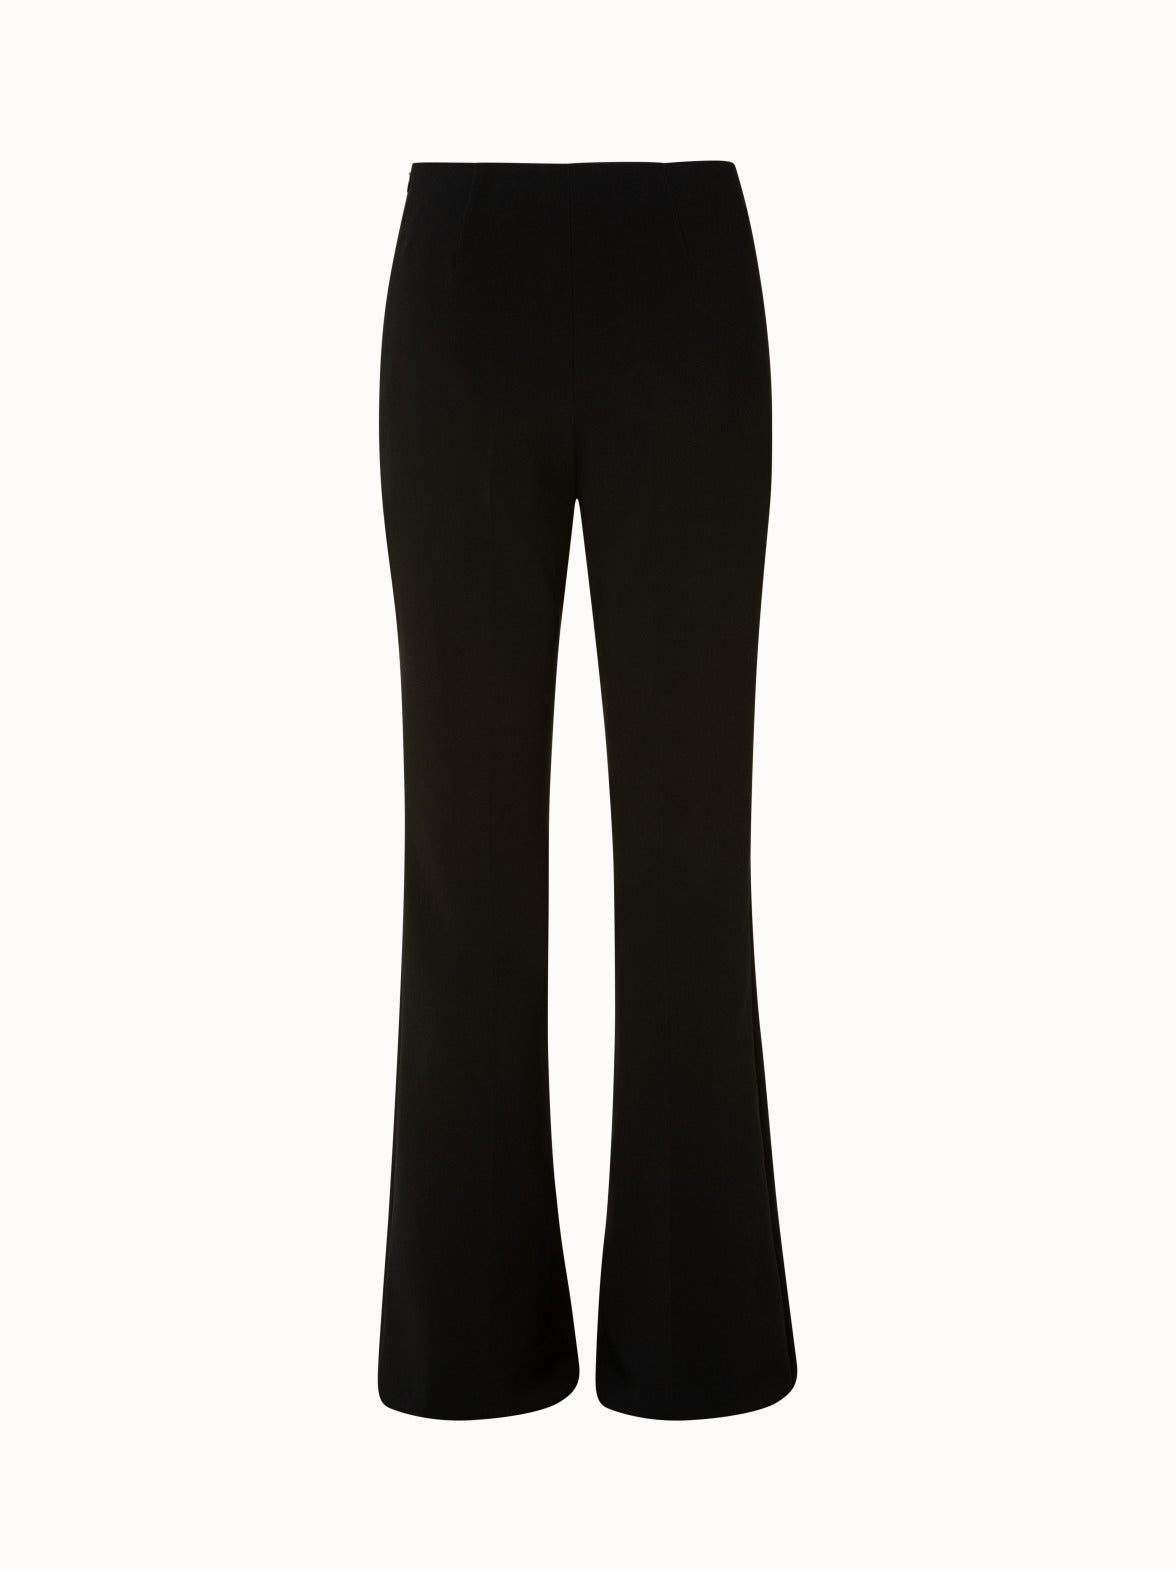 NotAwear Whale Tail Skinny Boot Cut Pants Black